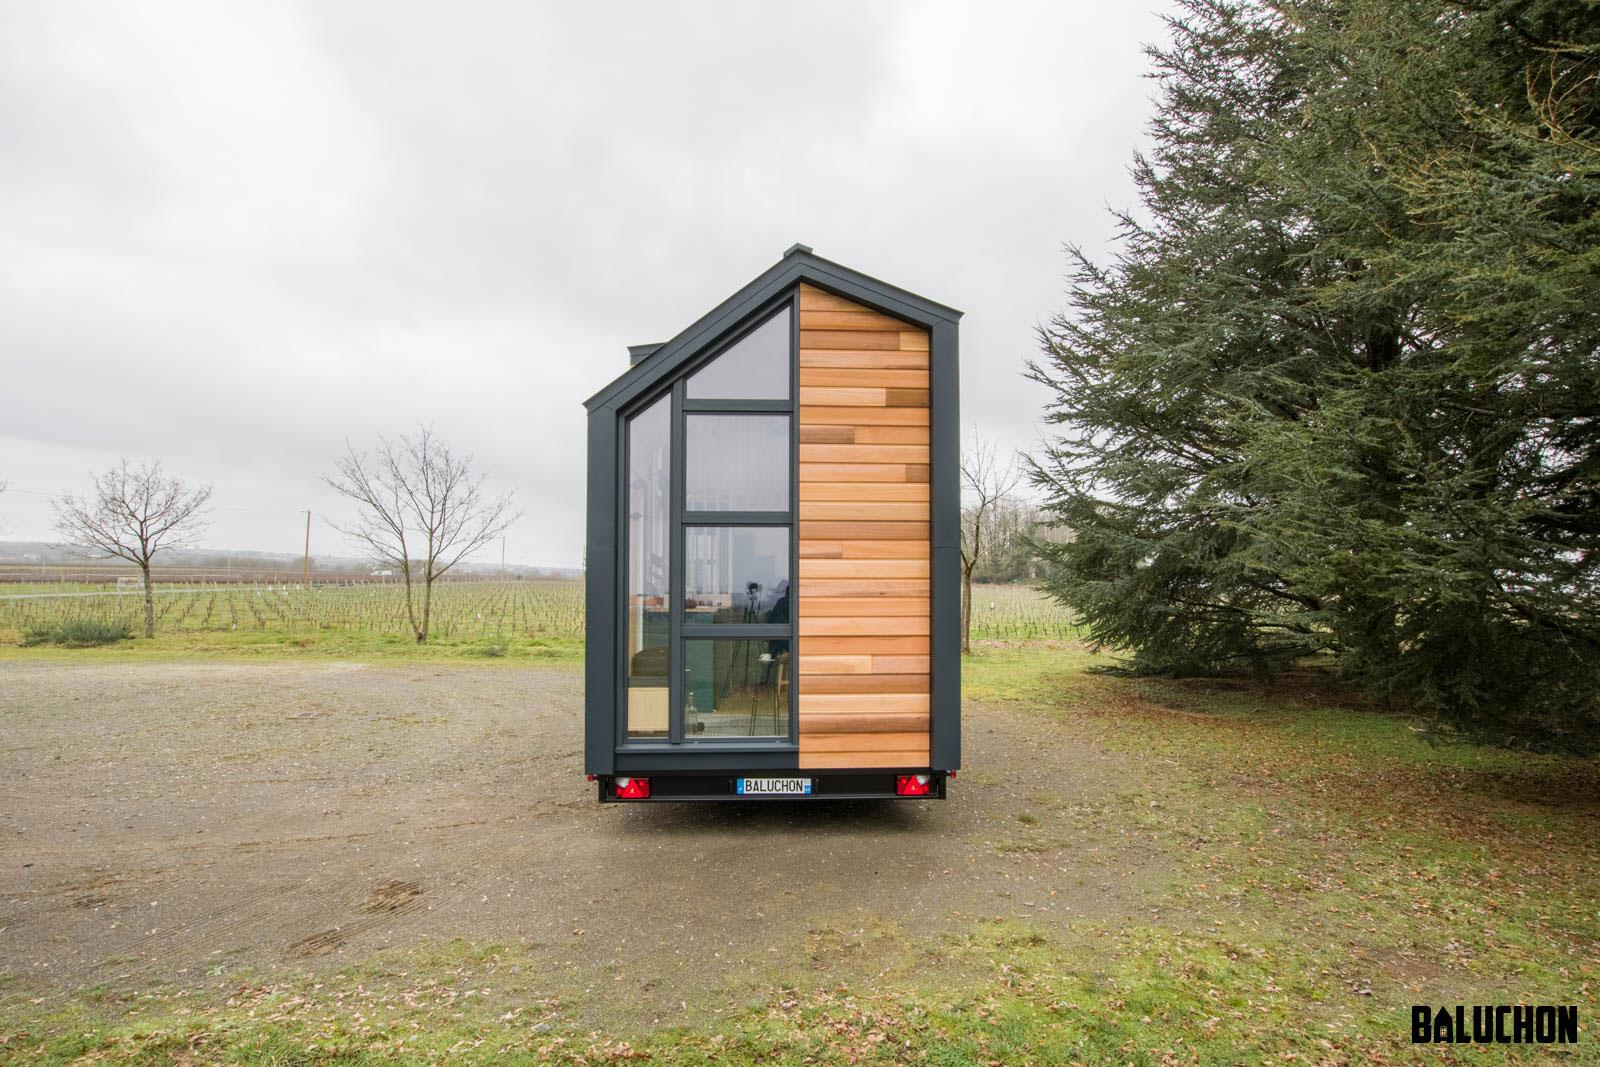 End of Tiny House With Windows and Wood Siding - Sherpa by Baluchon